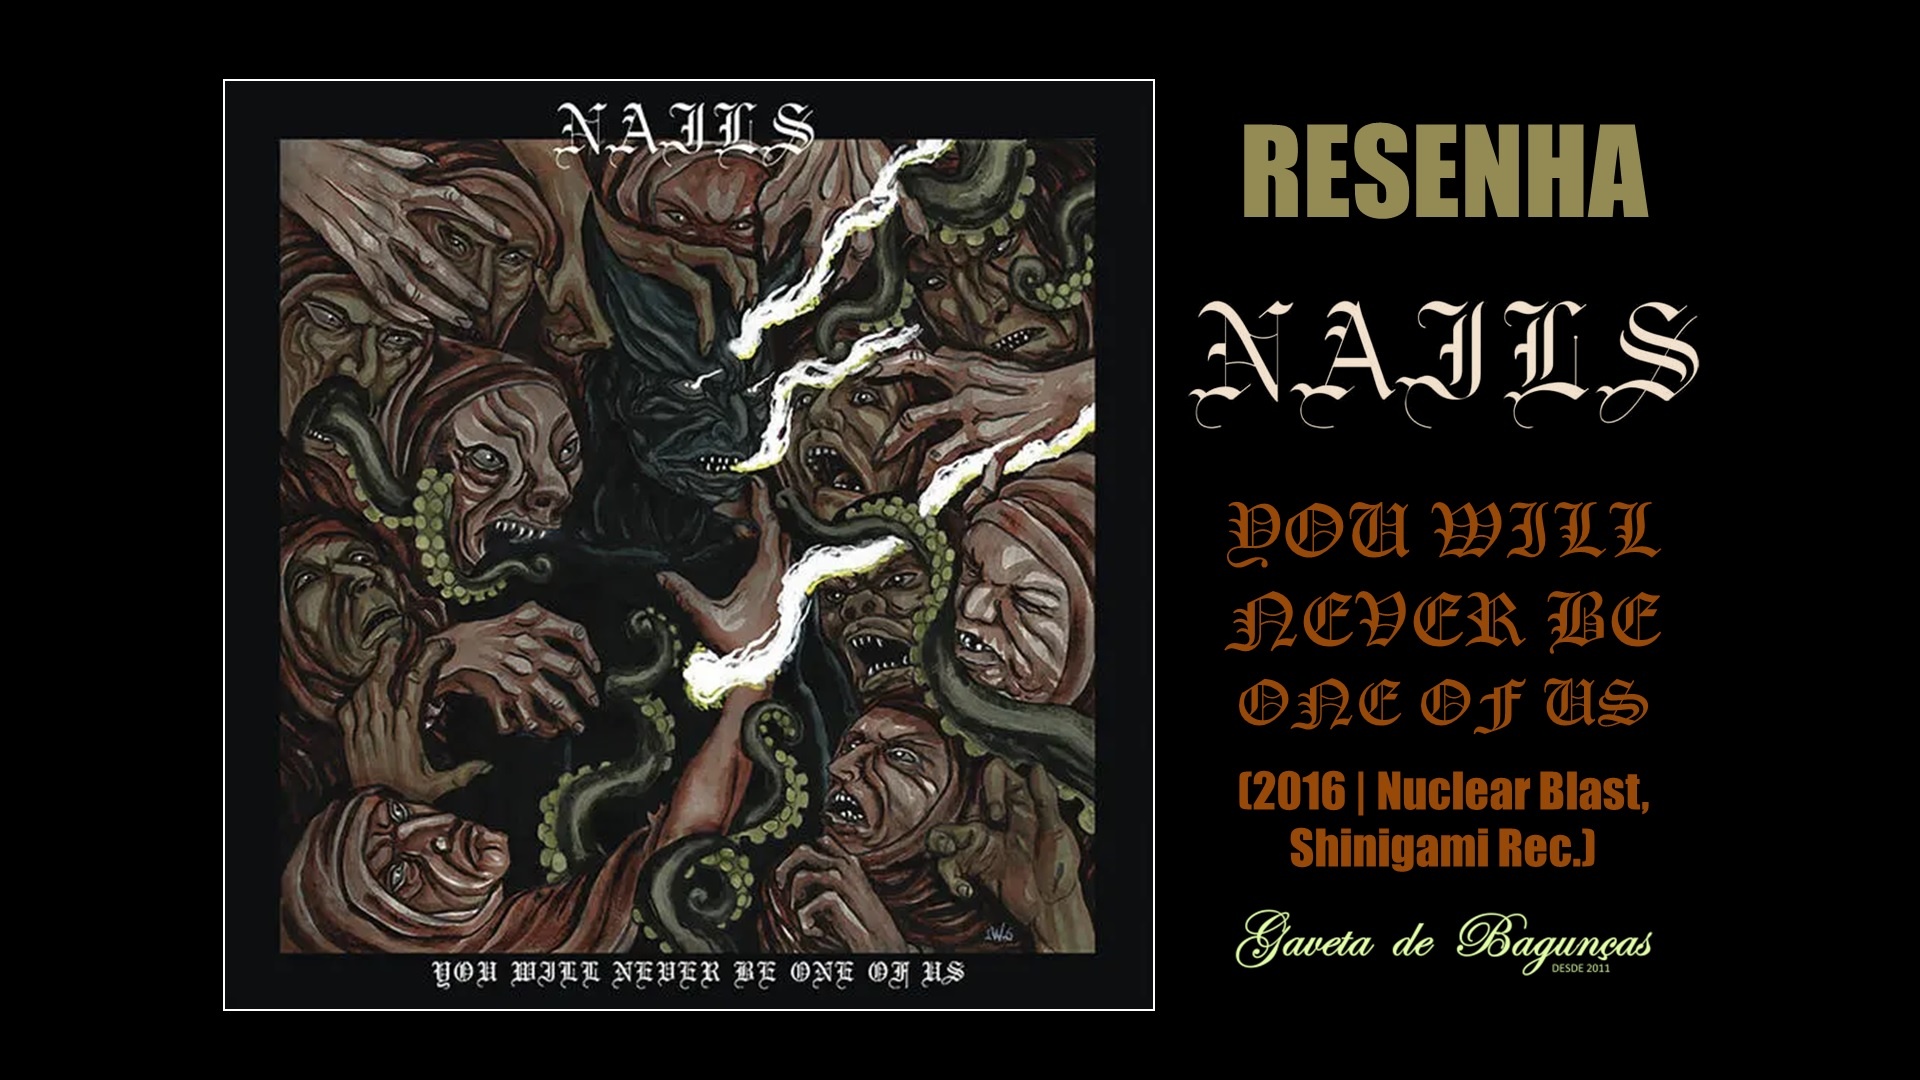 Nails - You Will Never Be One Of Us (2016, Nuclear Blast, Shinigami Records) Resenha Review